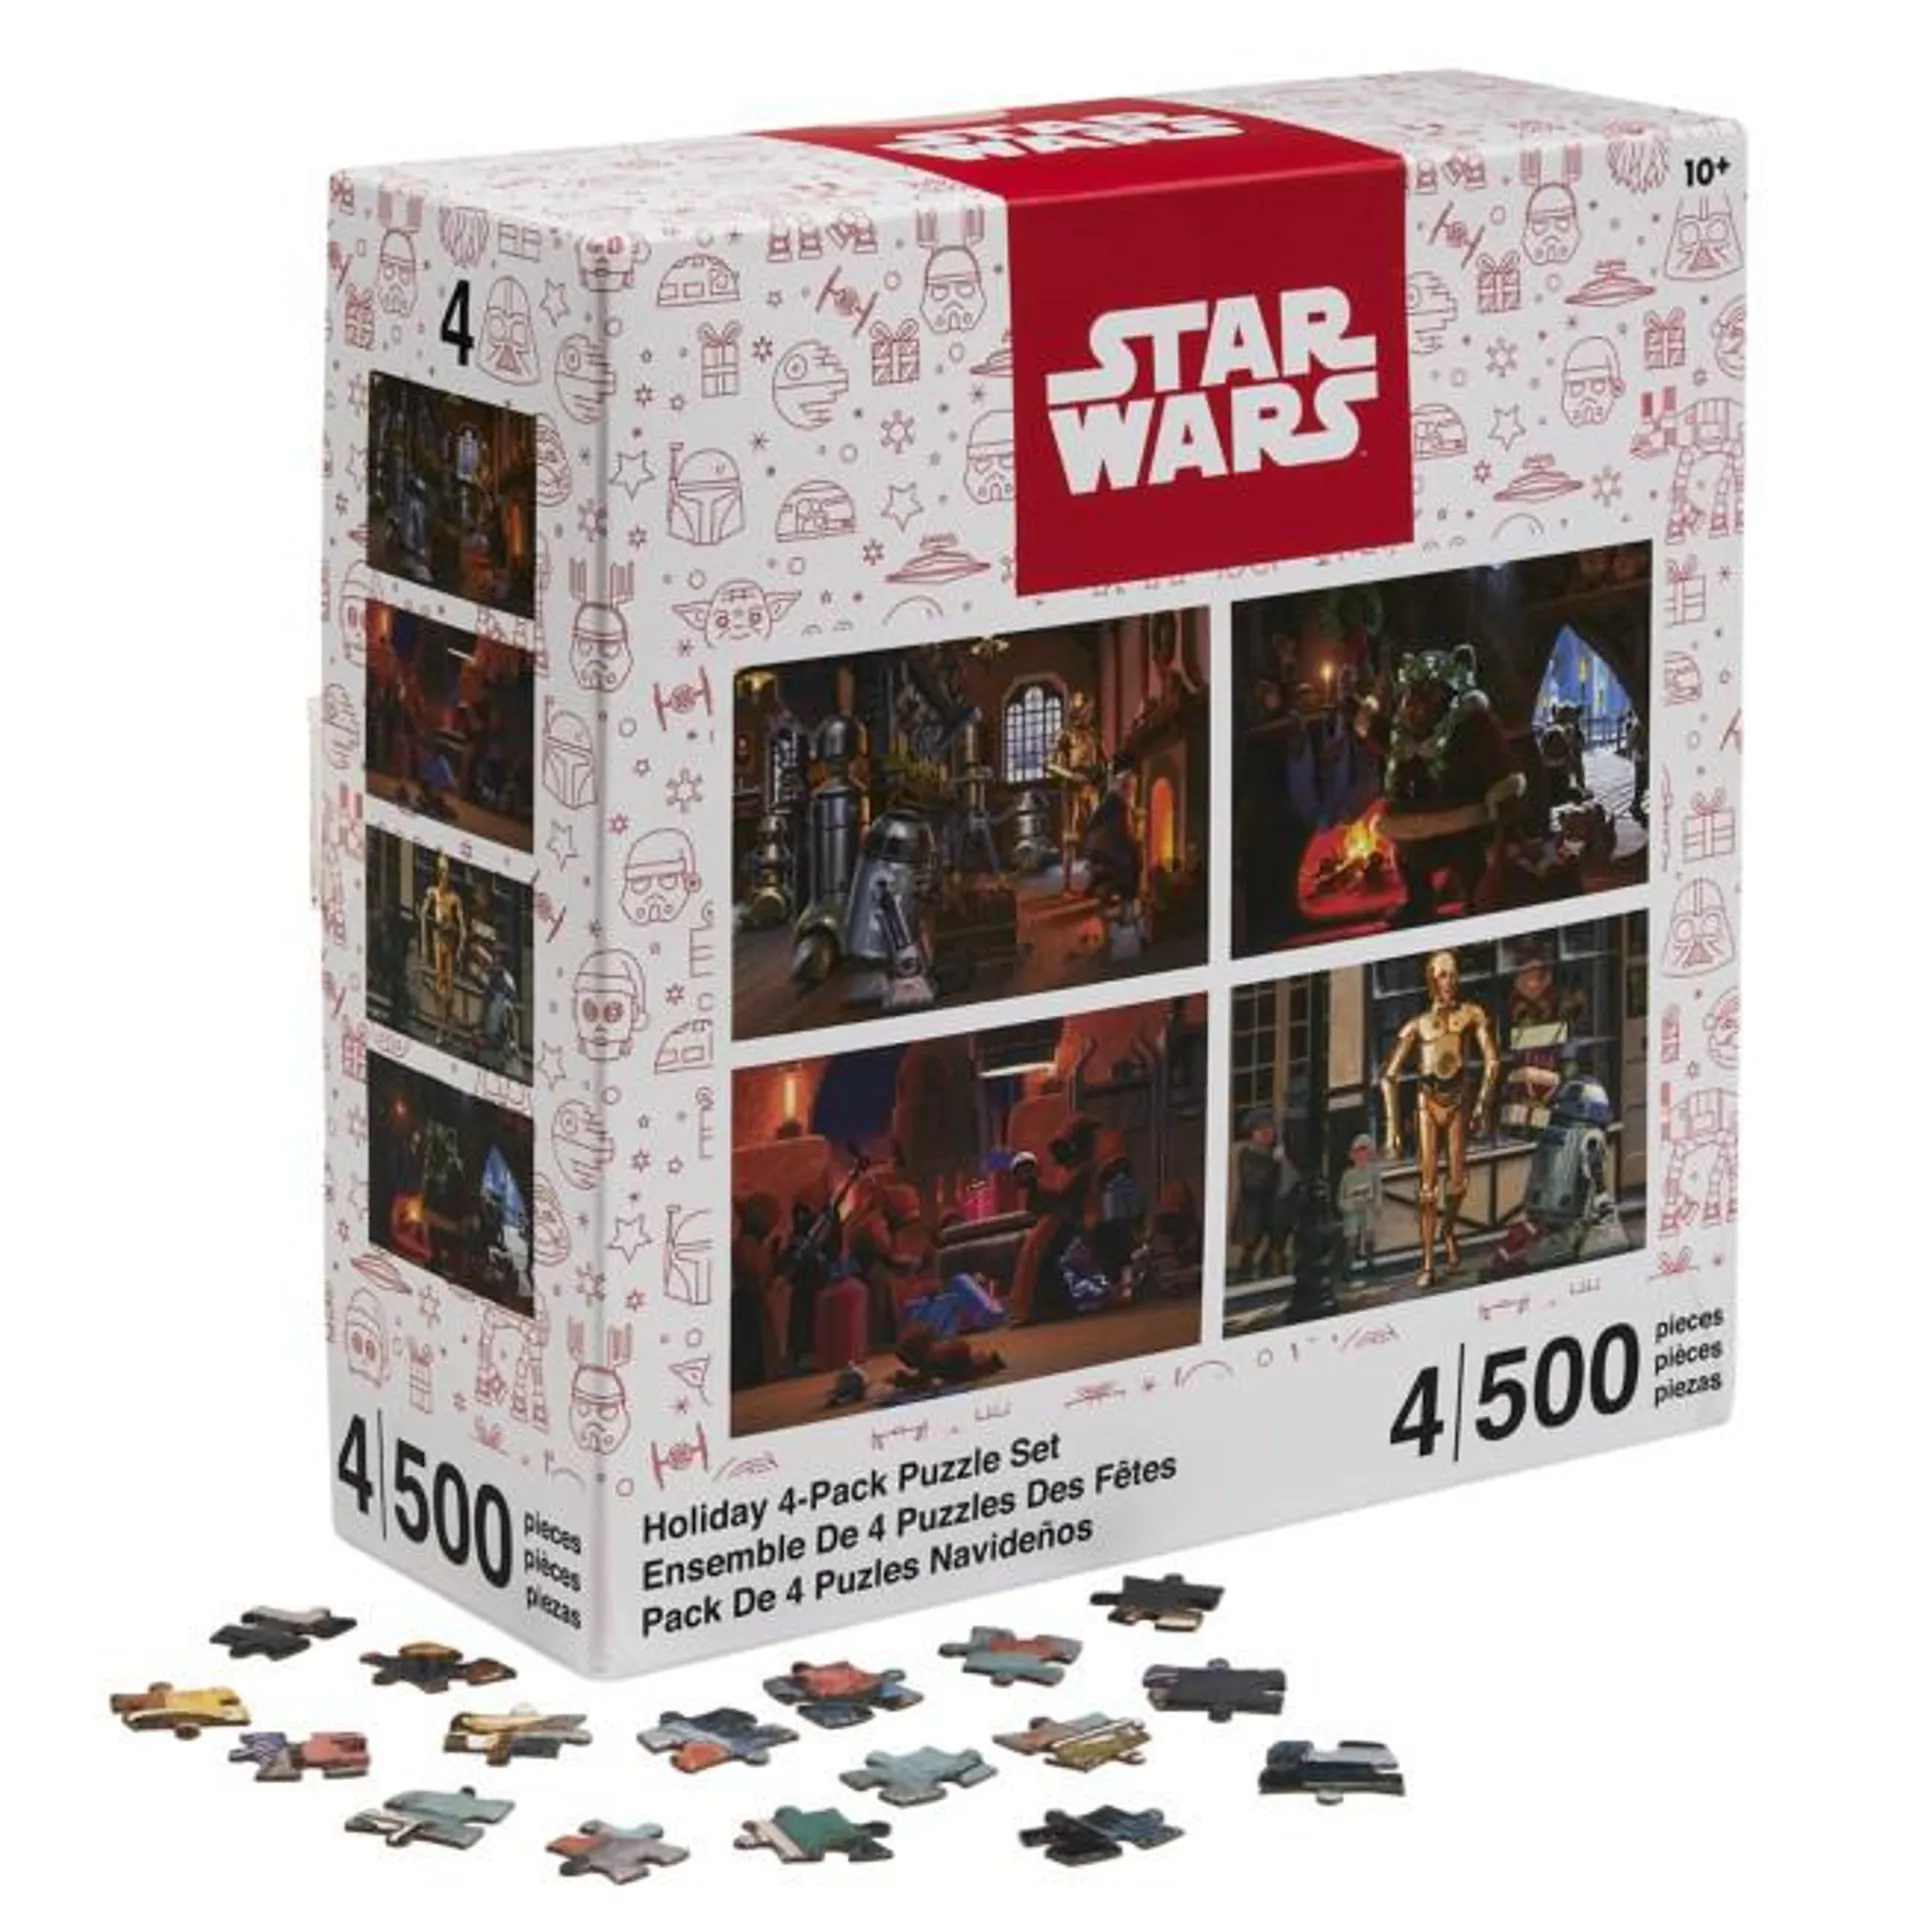 Disney Store Star Wars Holiday Four-Pack Puzzle Set